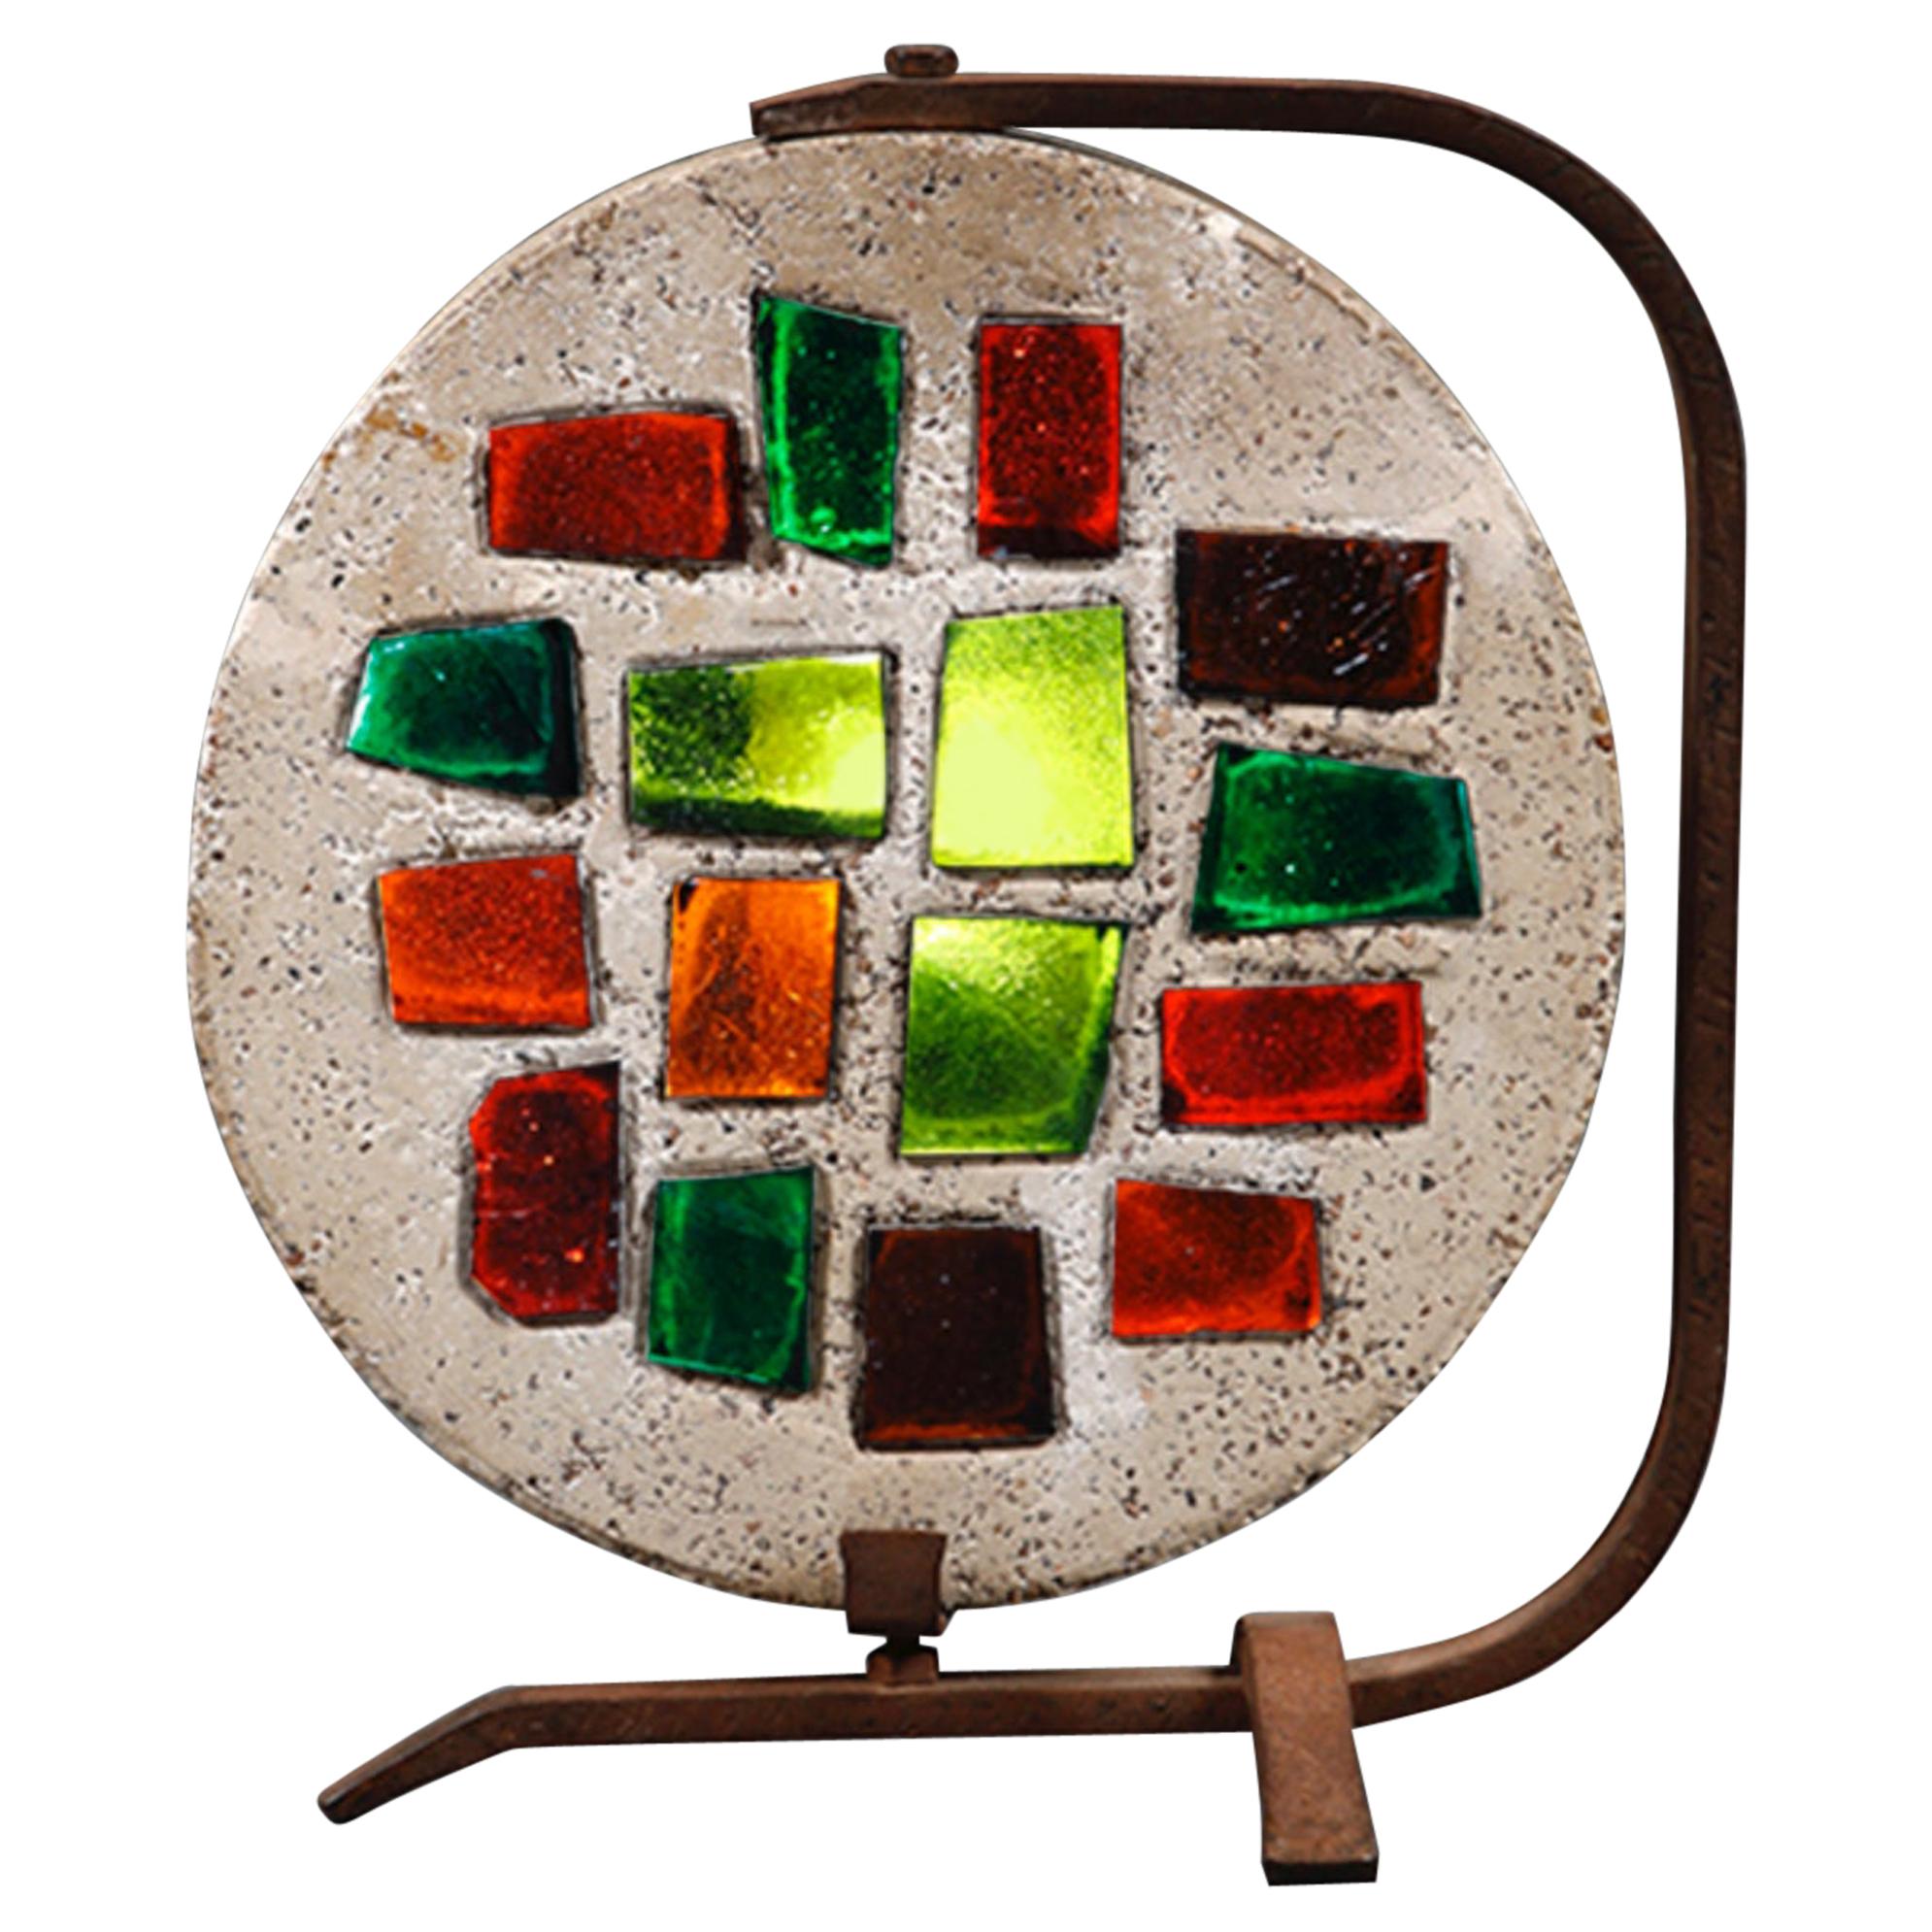 A brutalist concrete and stained glass lamp, circa 1950